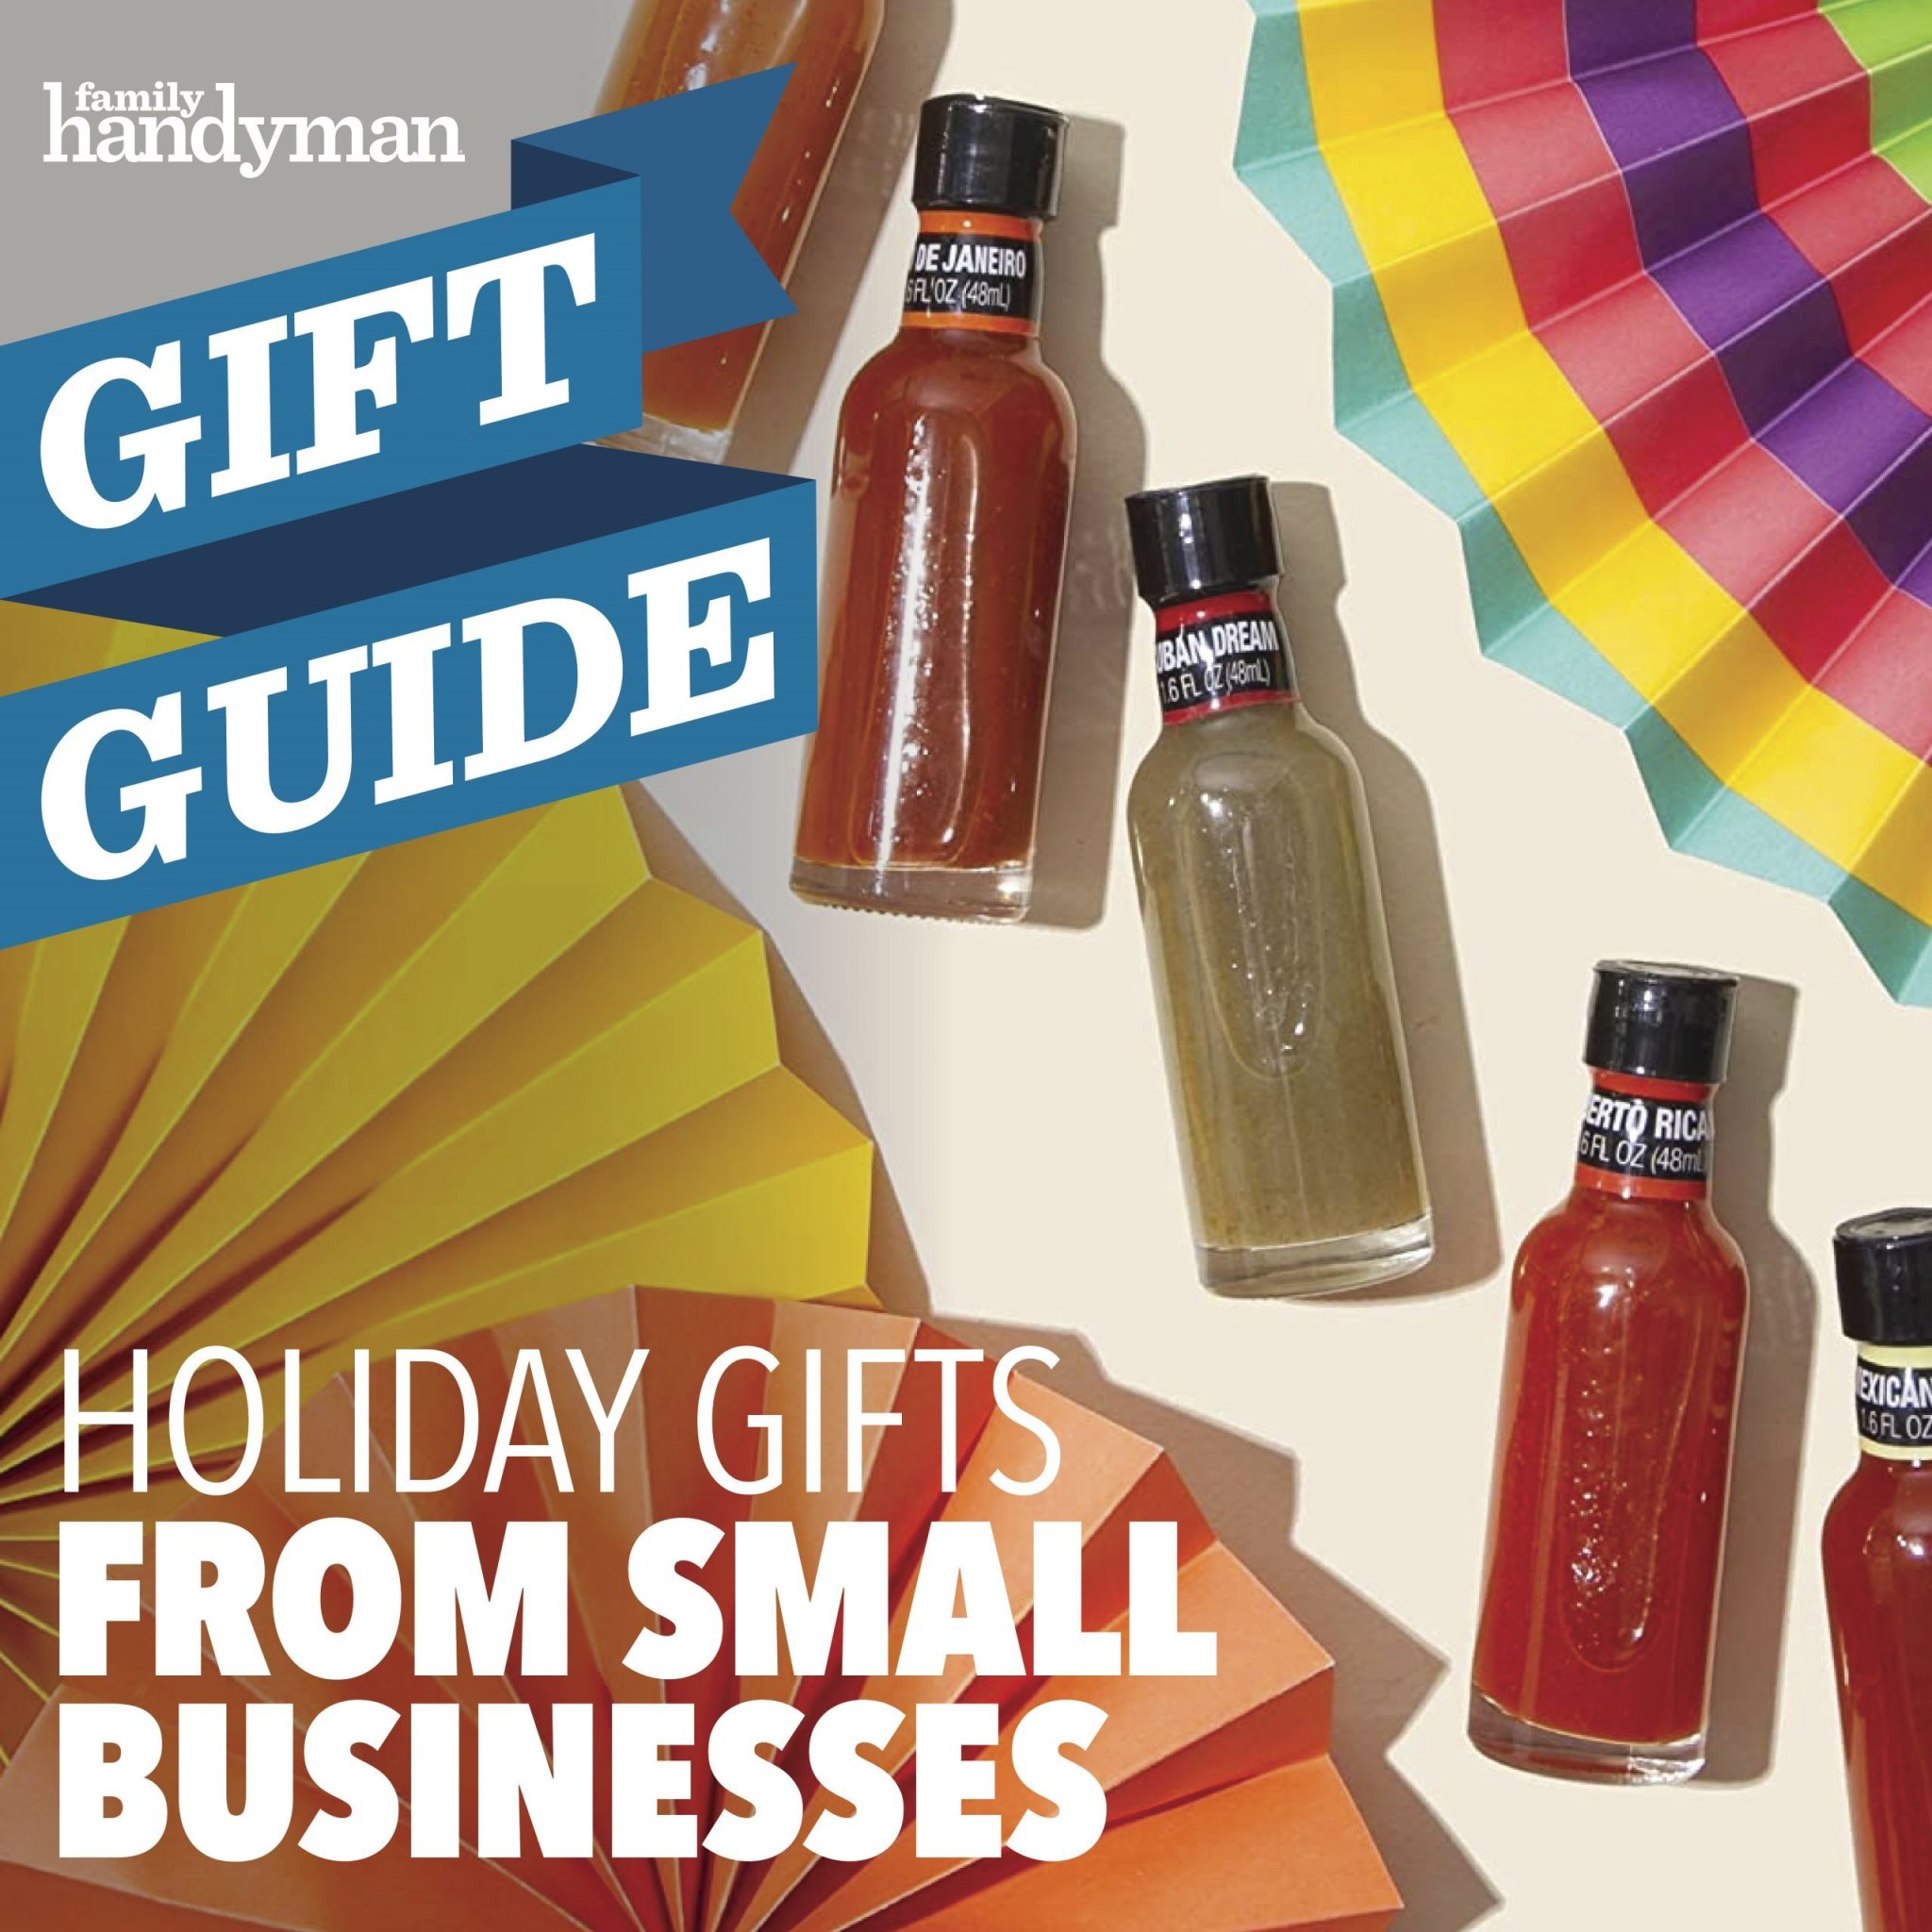 Shop Local with These 10 Holiday Gifts From Small Businesses